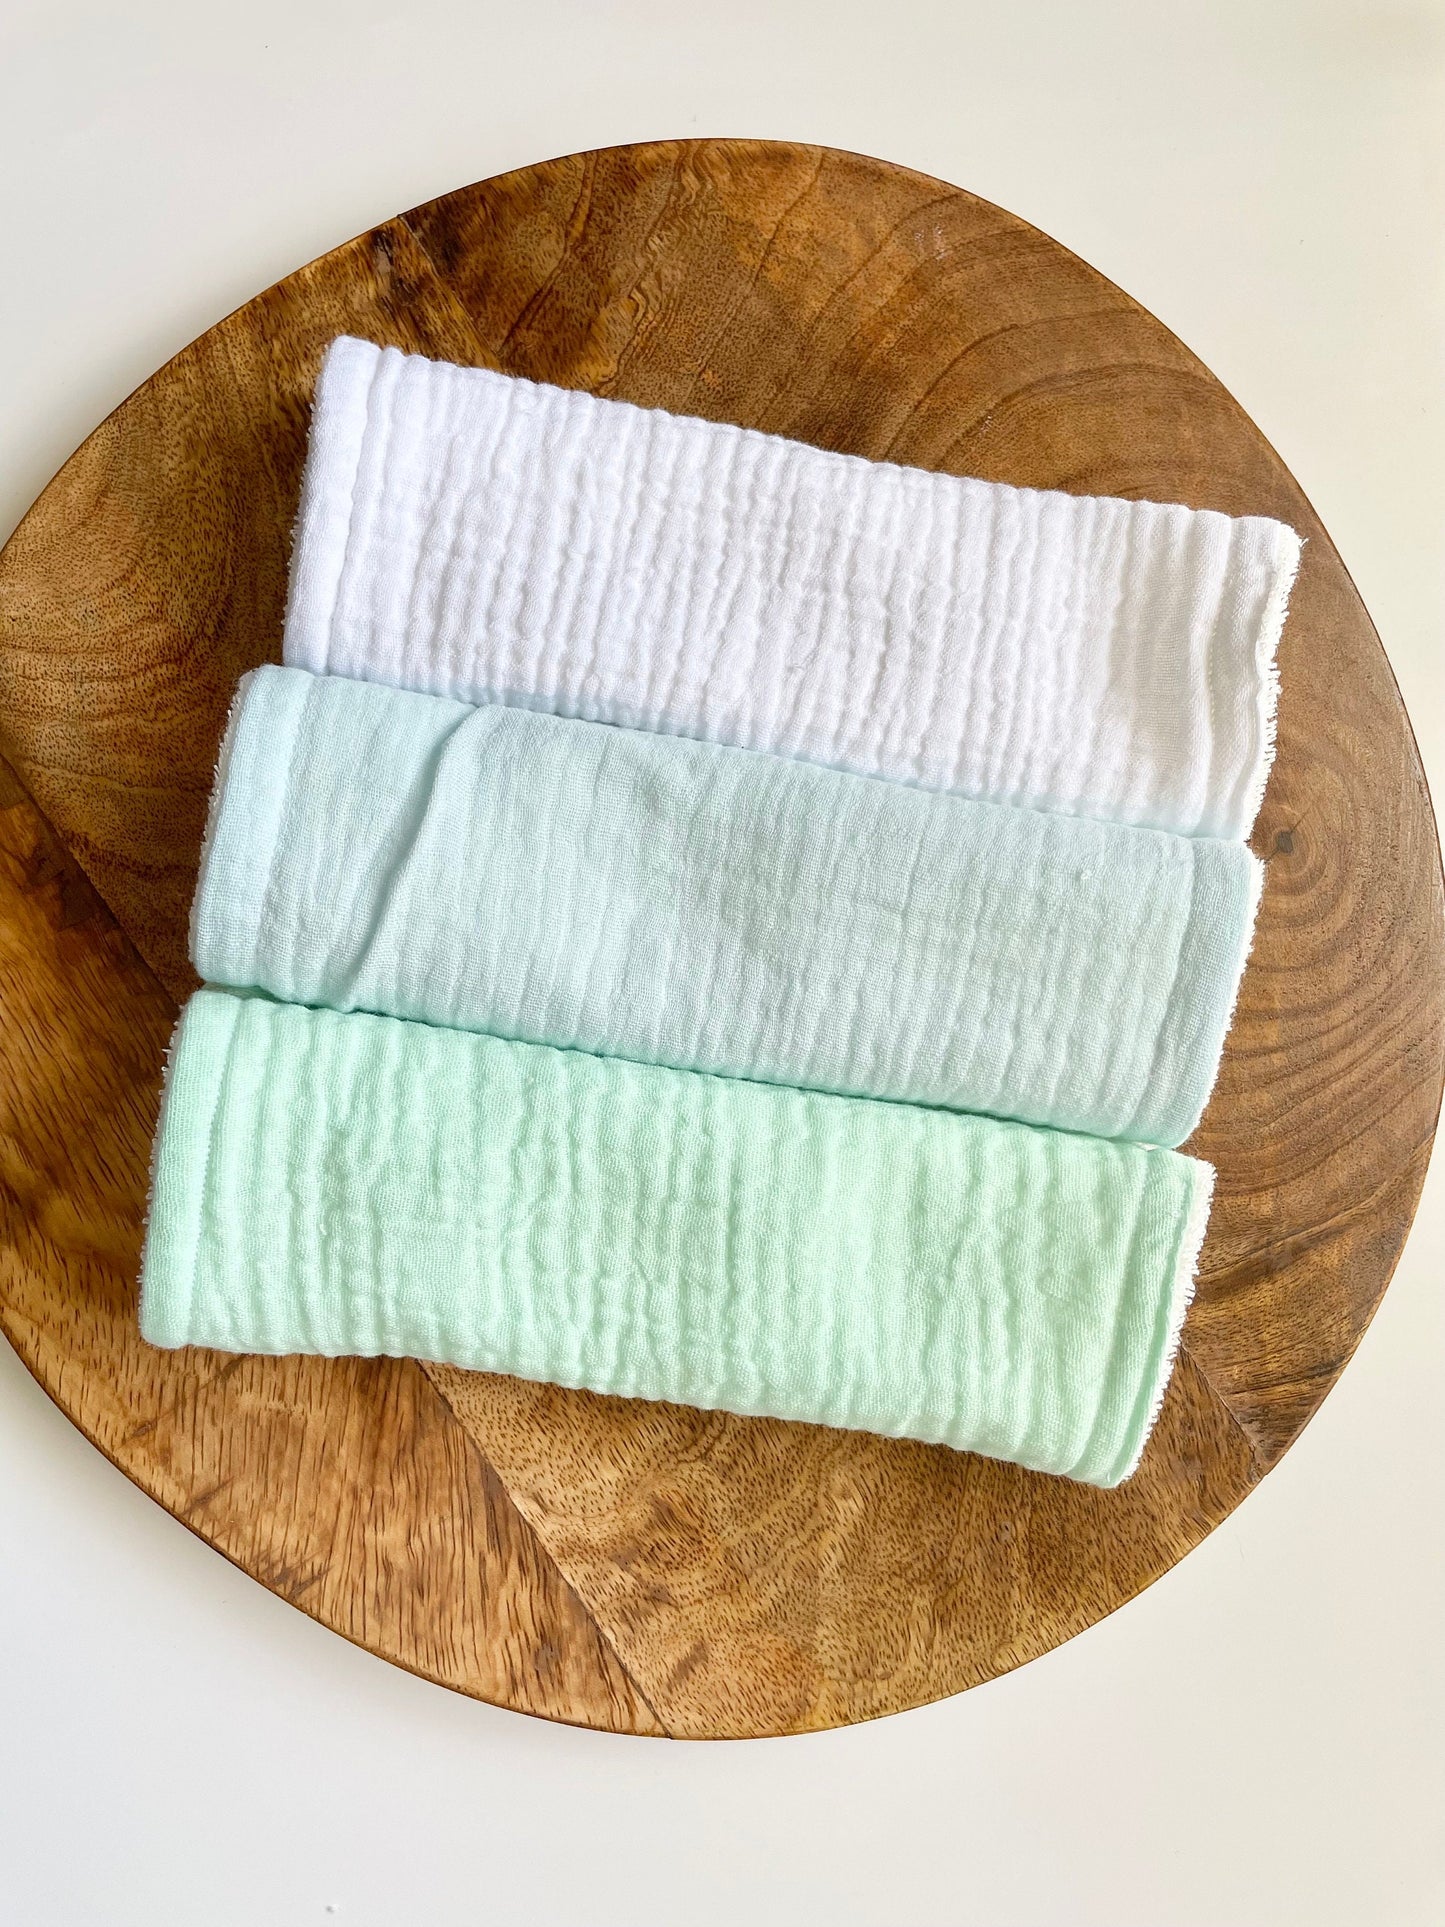 Wash Cloth organic bamboo cotton, baby blue wash bath cloth, double gauze face washer, reusable face wipes, baby gift, Olive & Miles